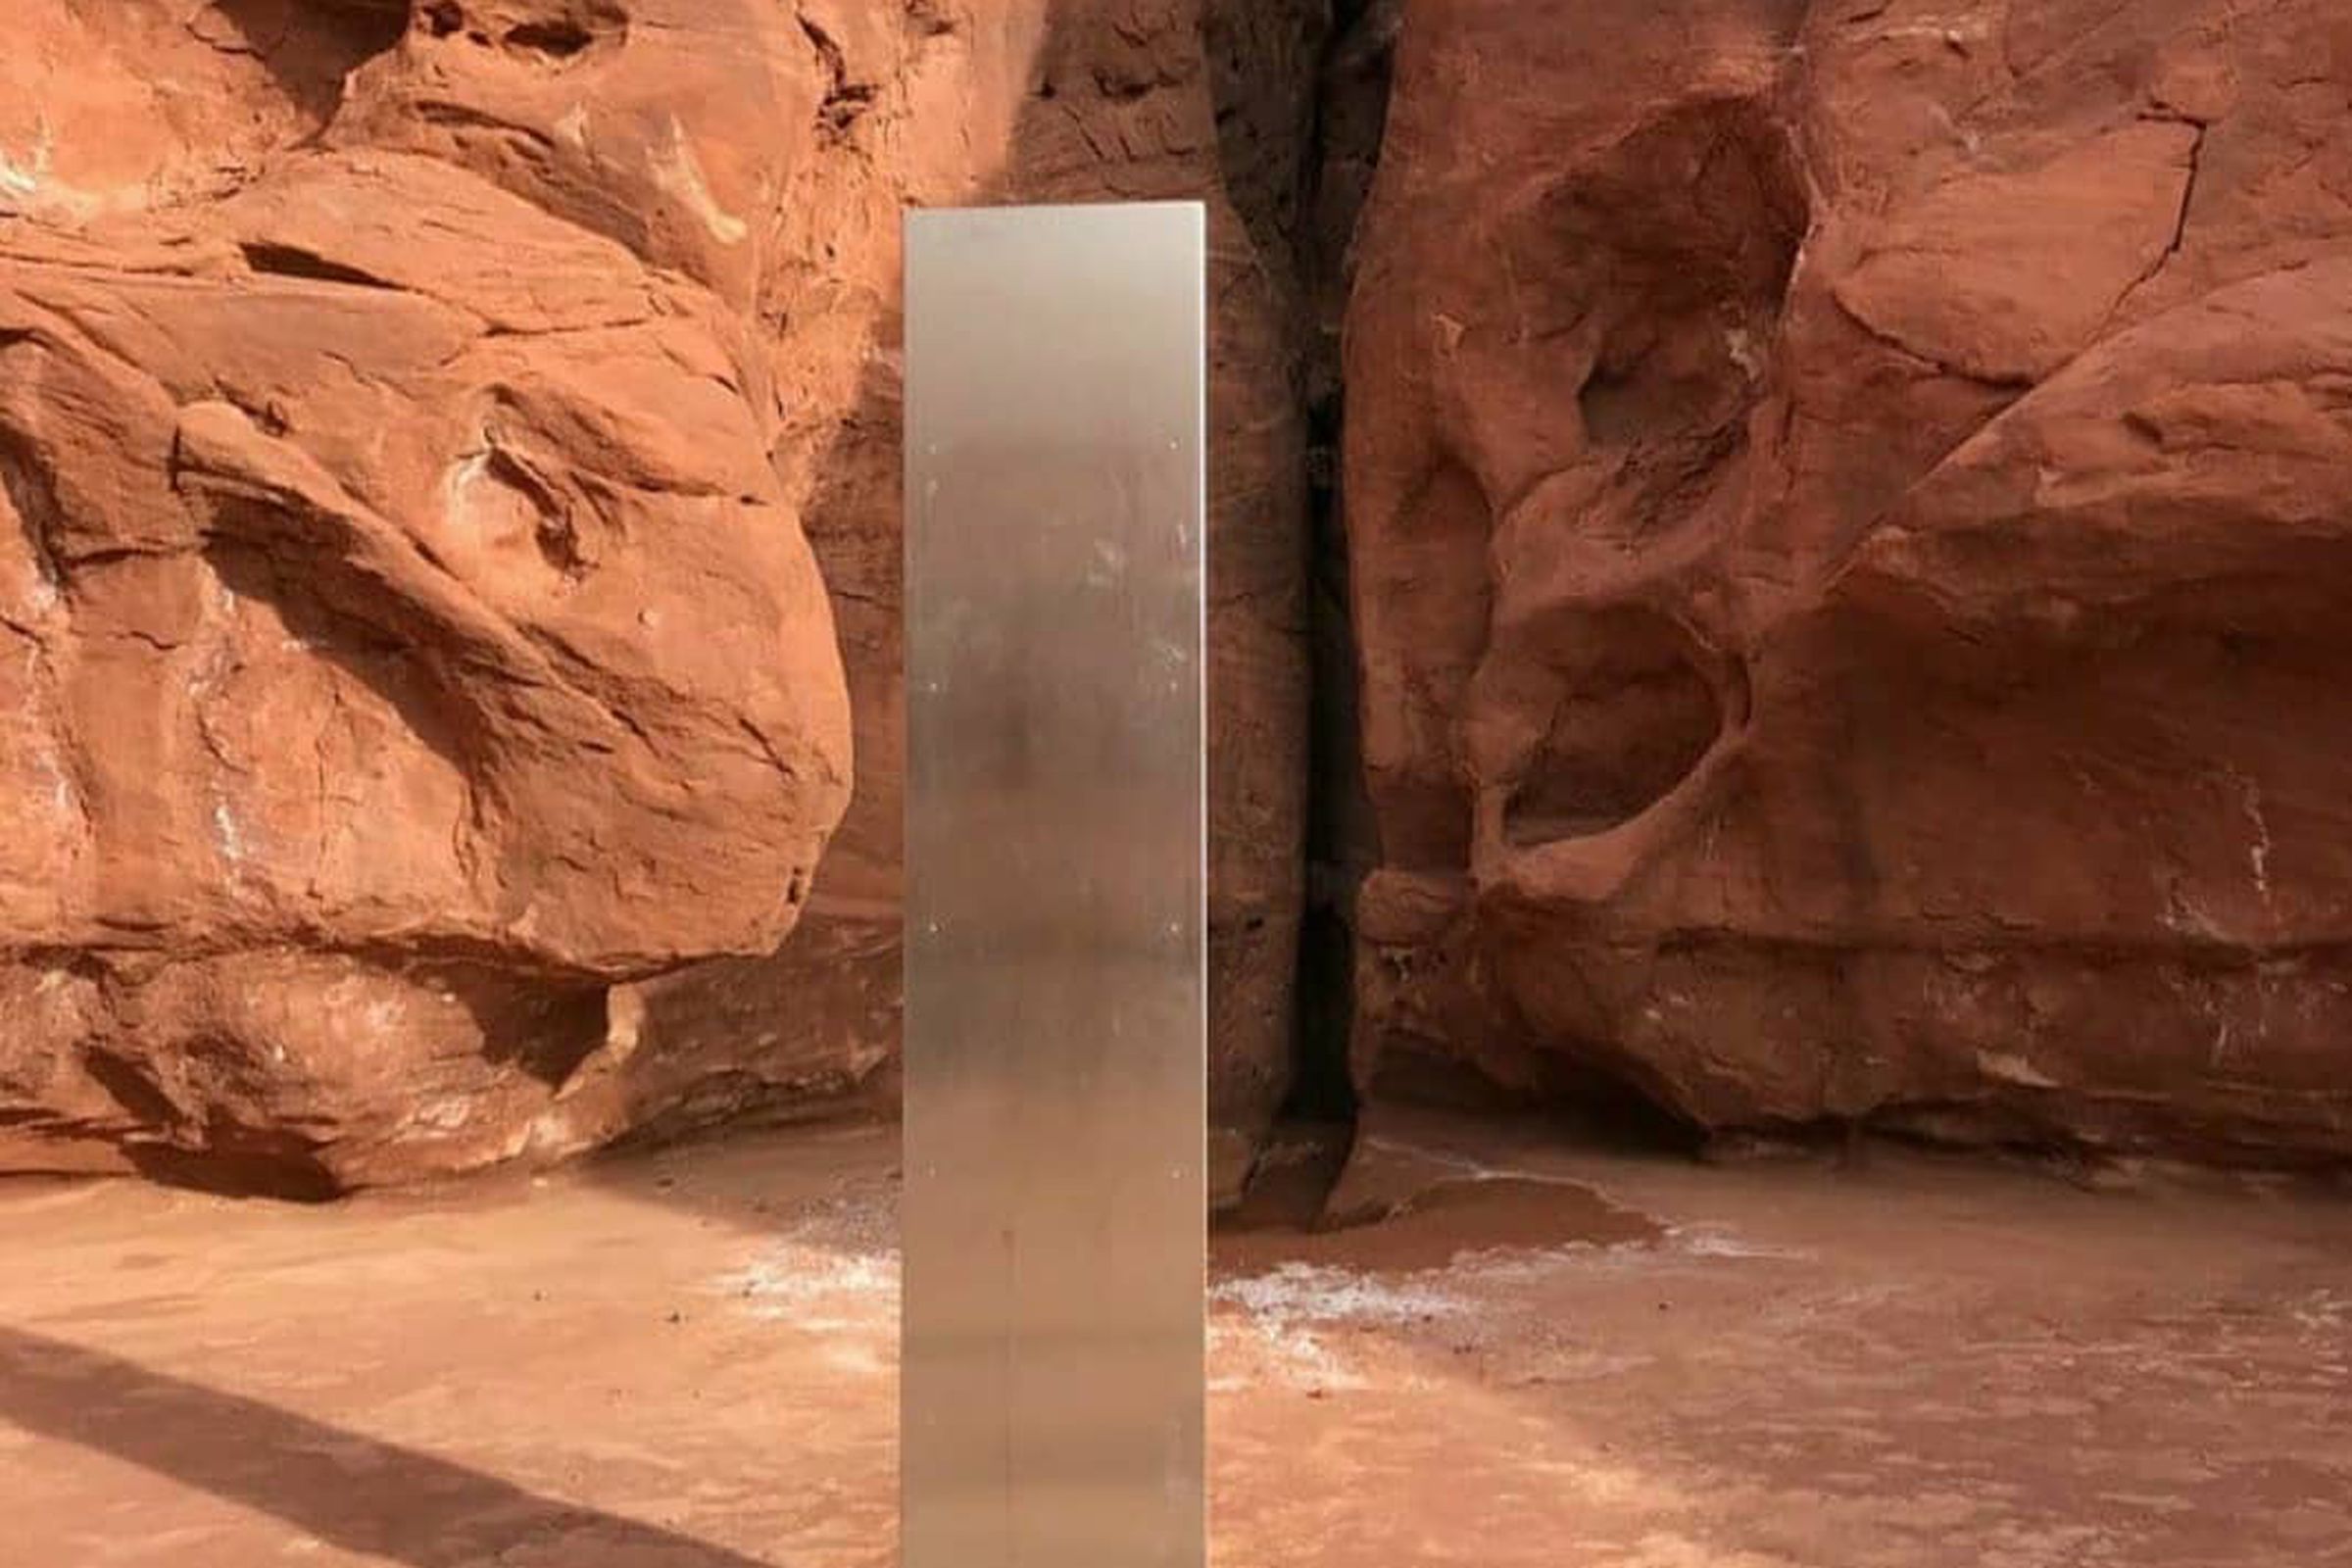 A mysterious monolith appeared, then disappeared, in rural Utah